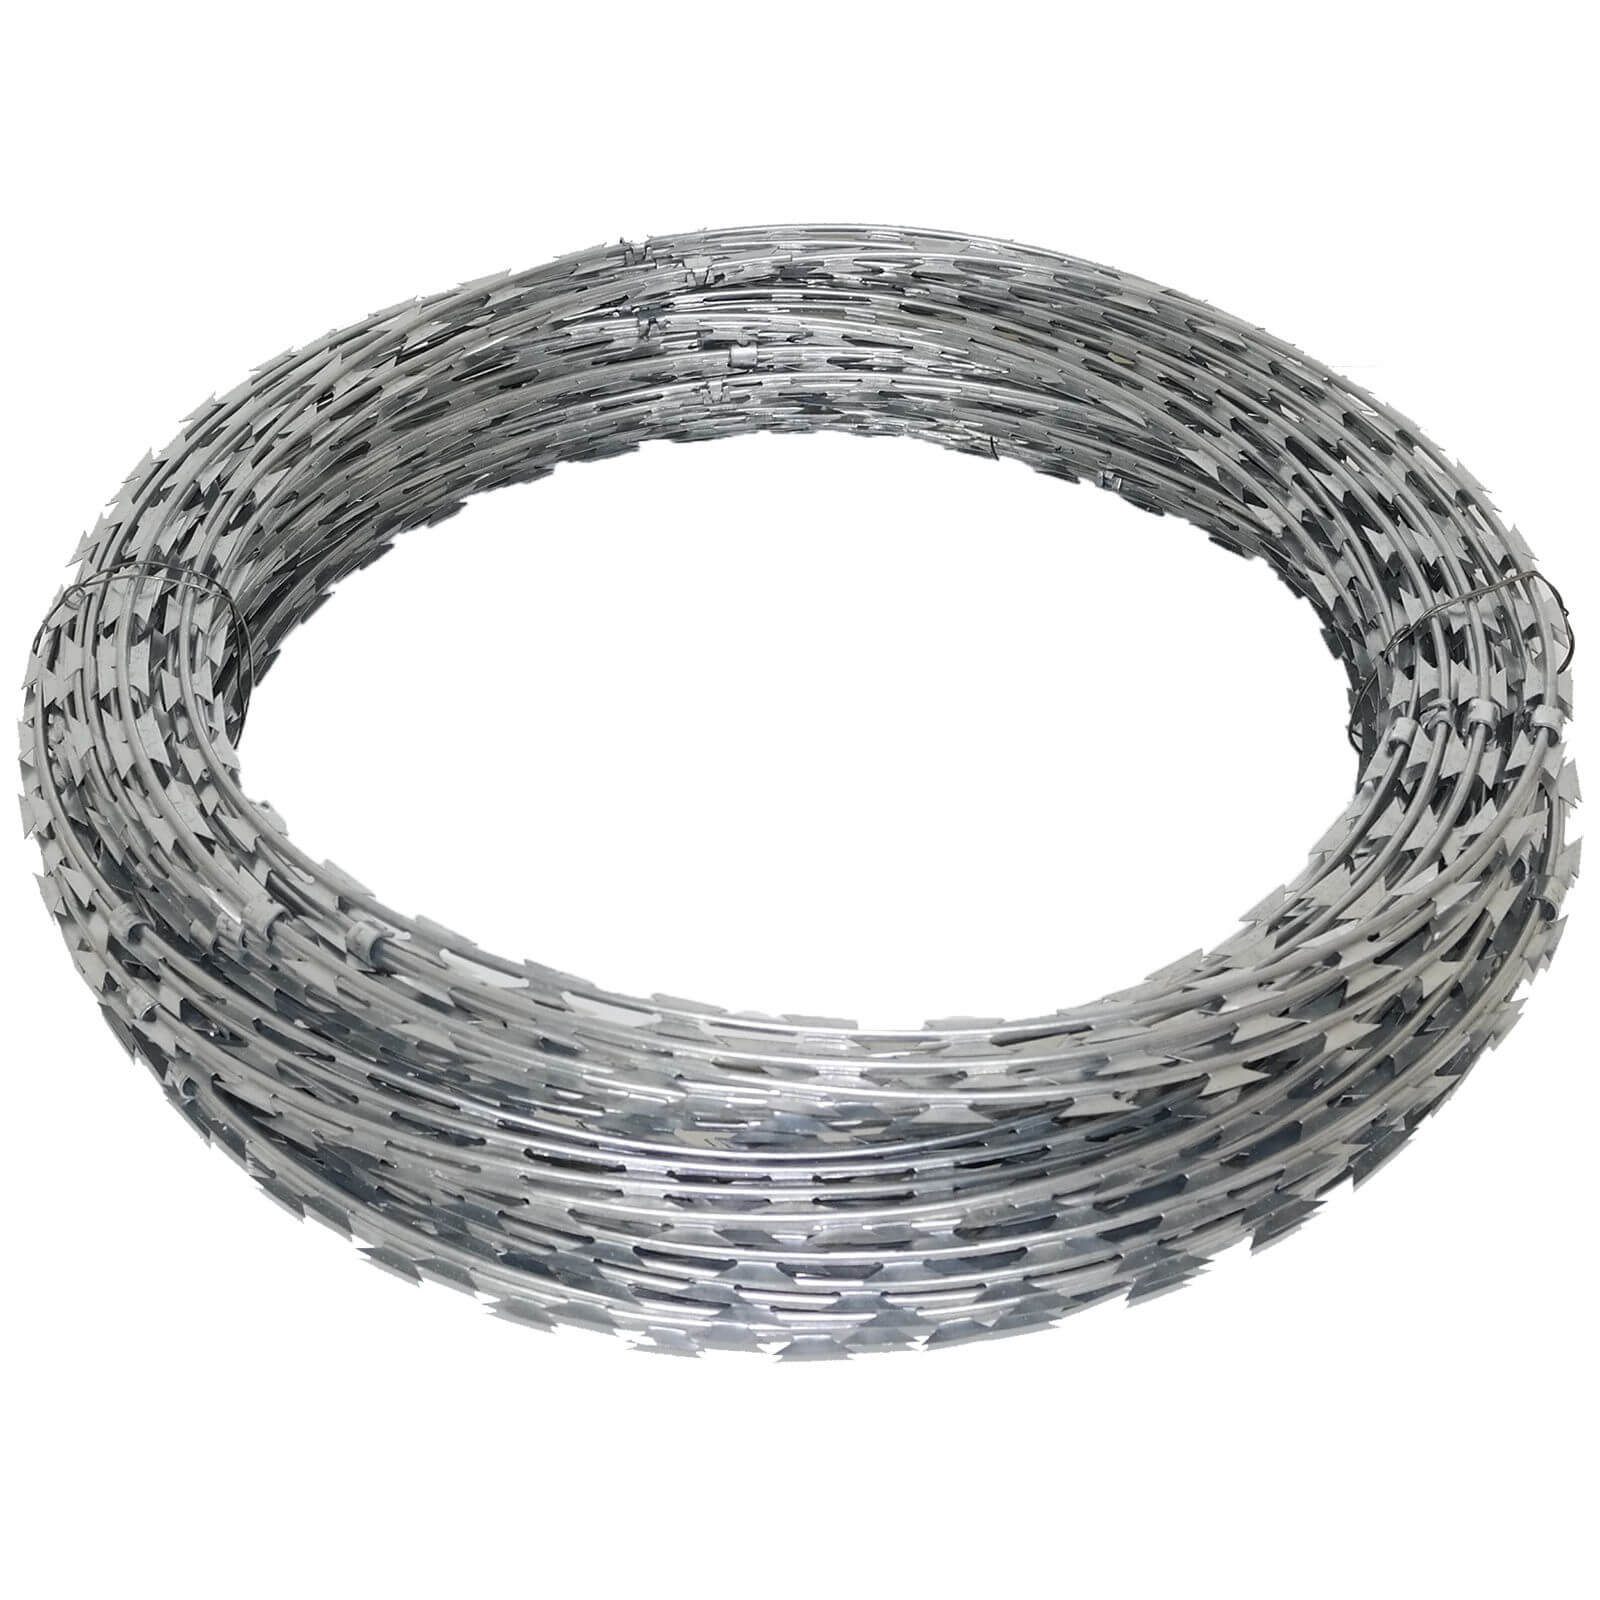 Ensure your property's safety with razor wire fencing